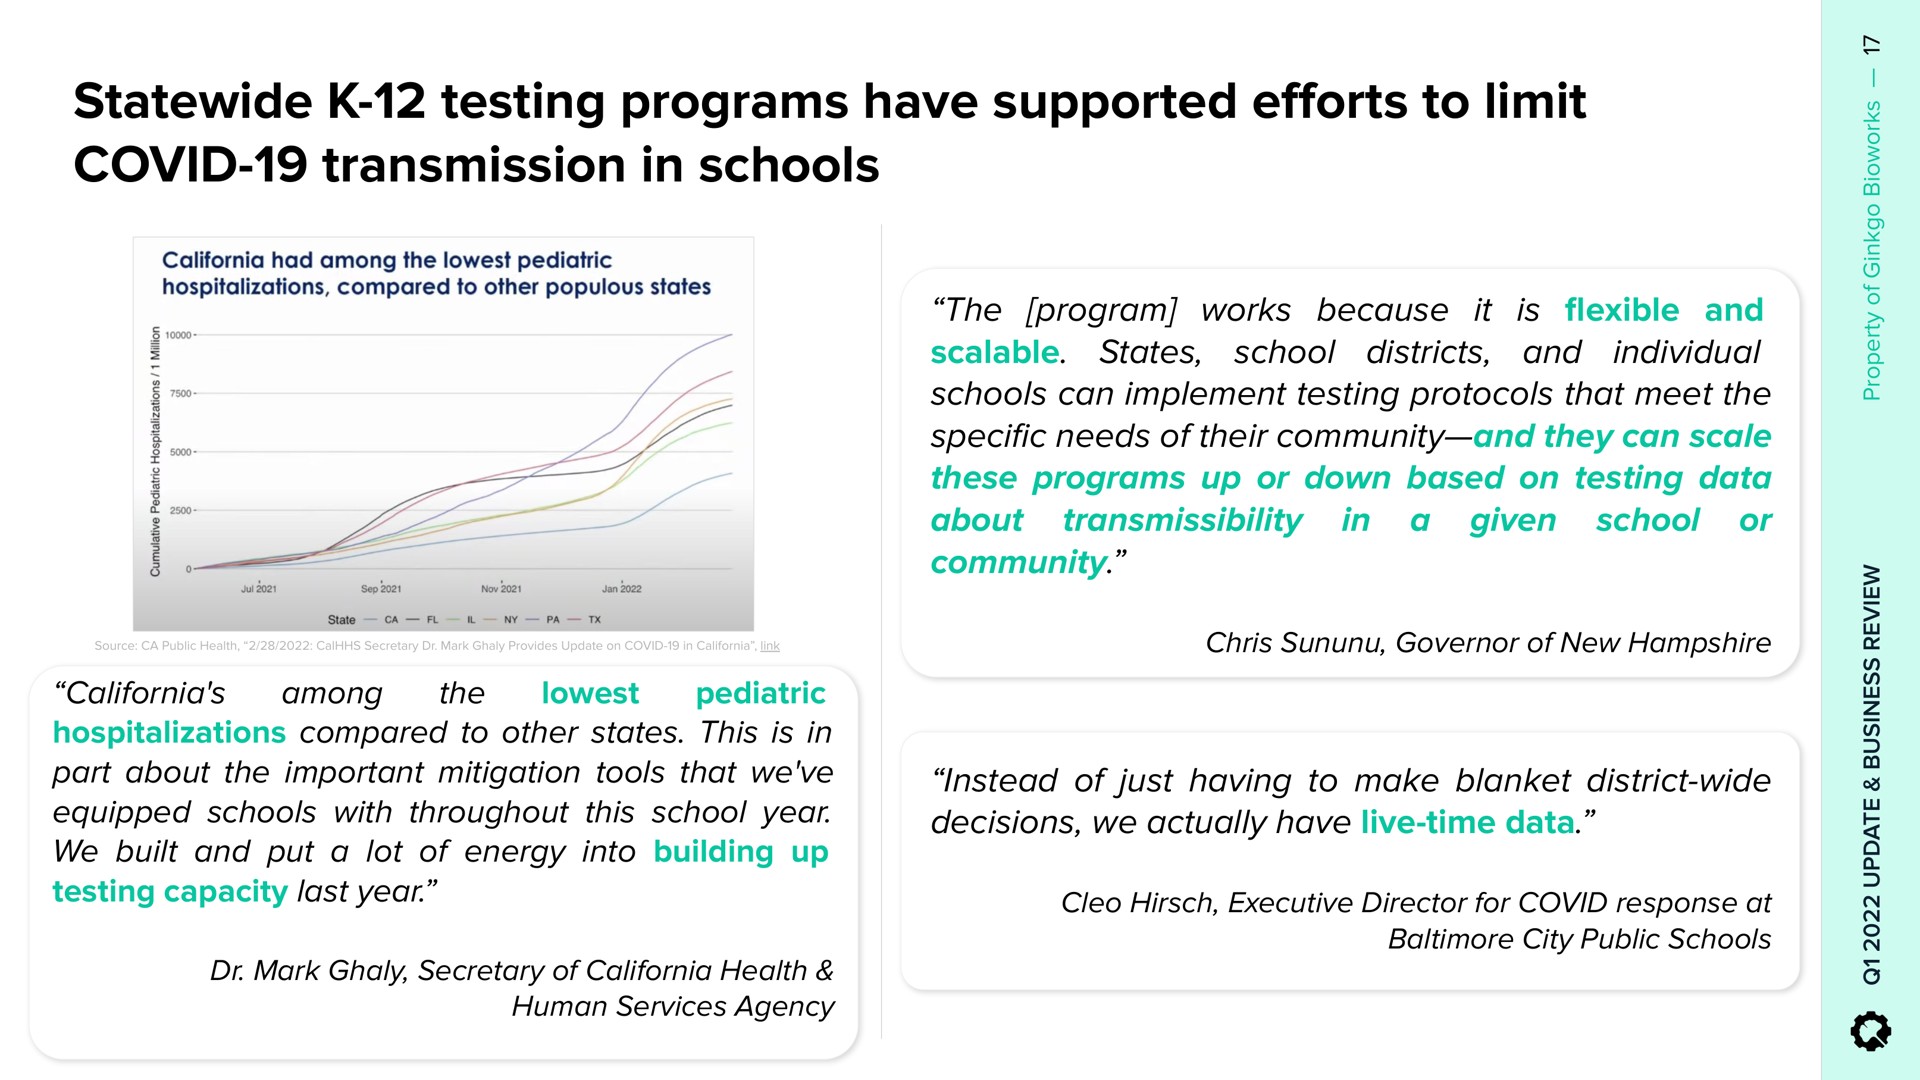 testing programs have supported to limit covid transmission in schools efforts | Ginkgo